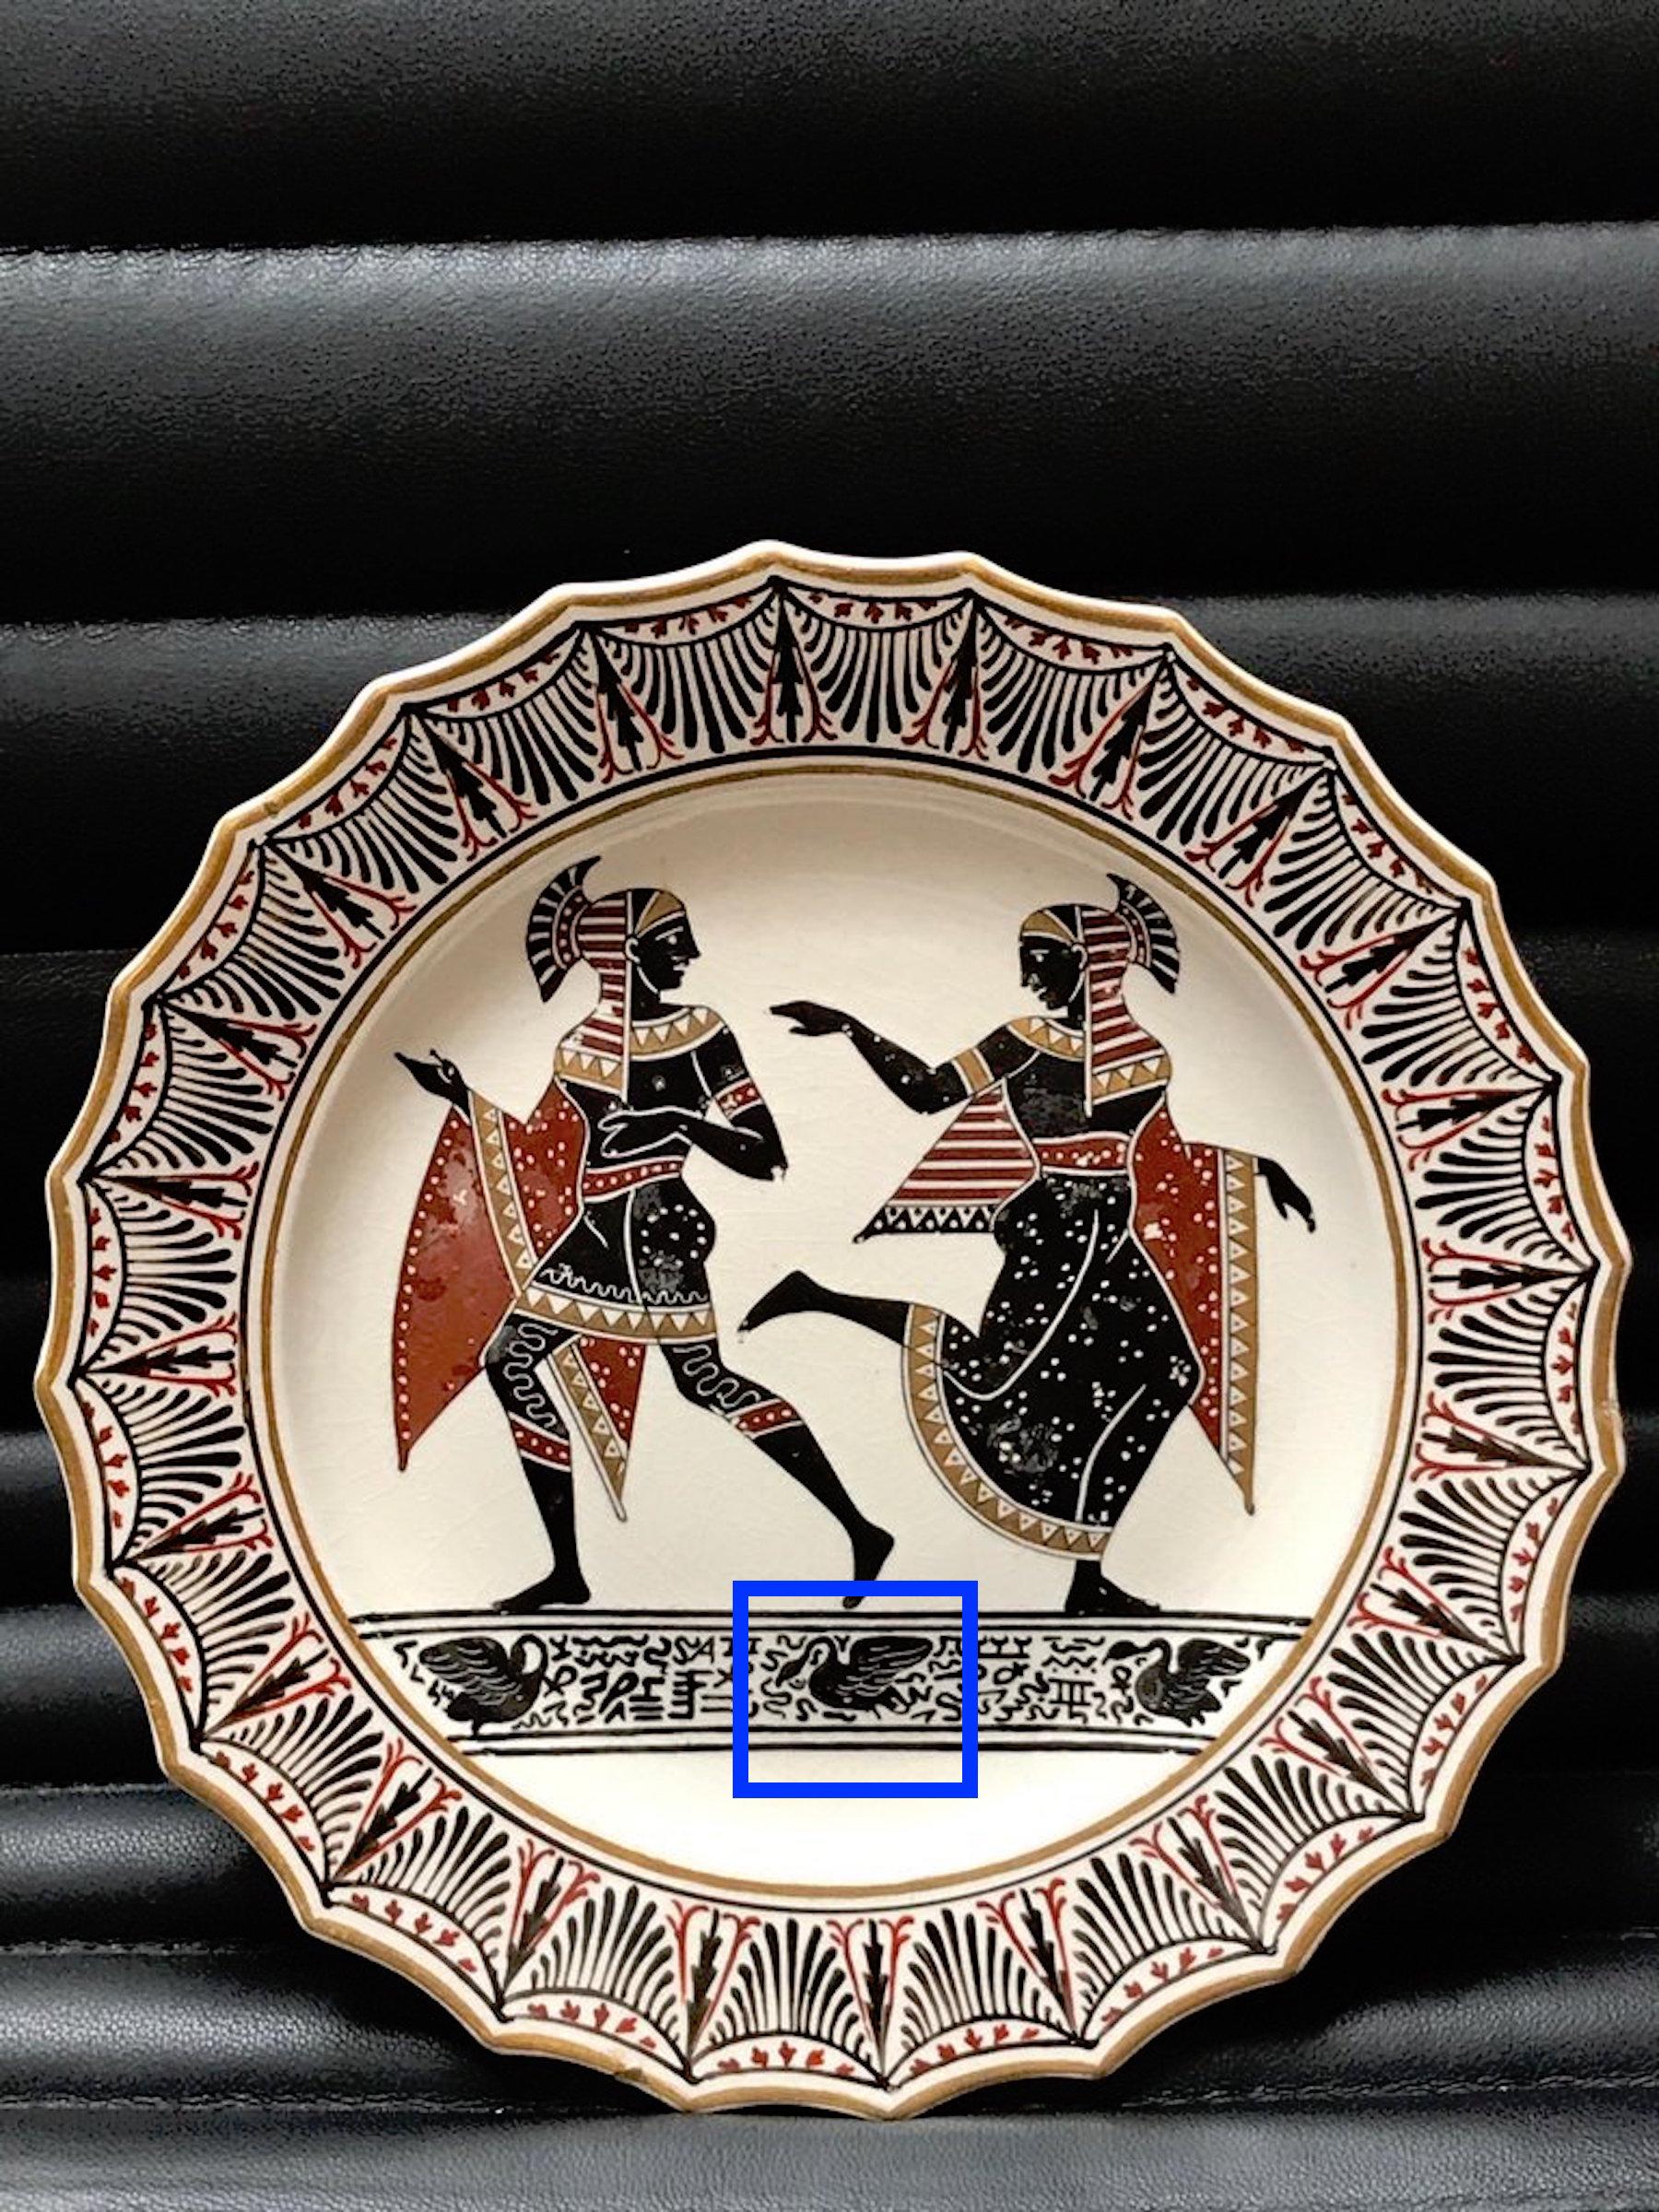 Giustiniani Egyptomania pottery plate with gilt highlights, and a central left facing swan
Neapolitan manufacture (Biagio Giustiniani & Sons) dated to 1830-1840, impressed script G.